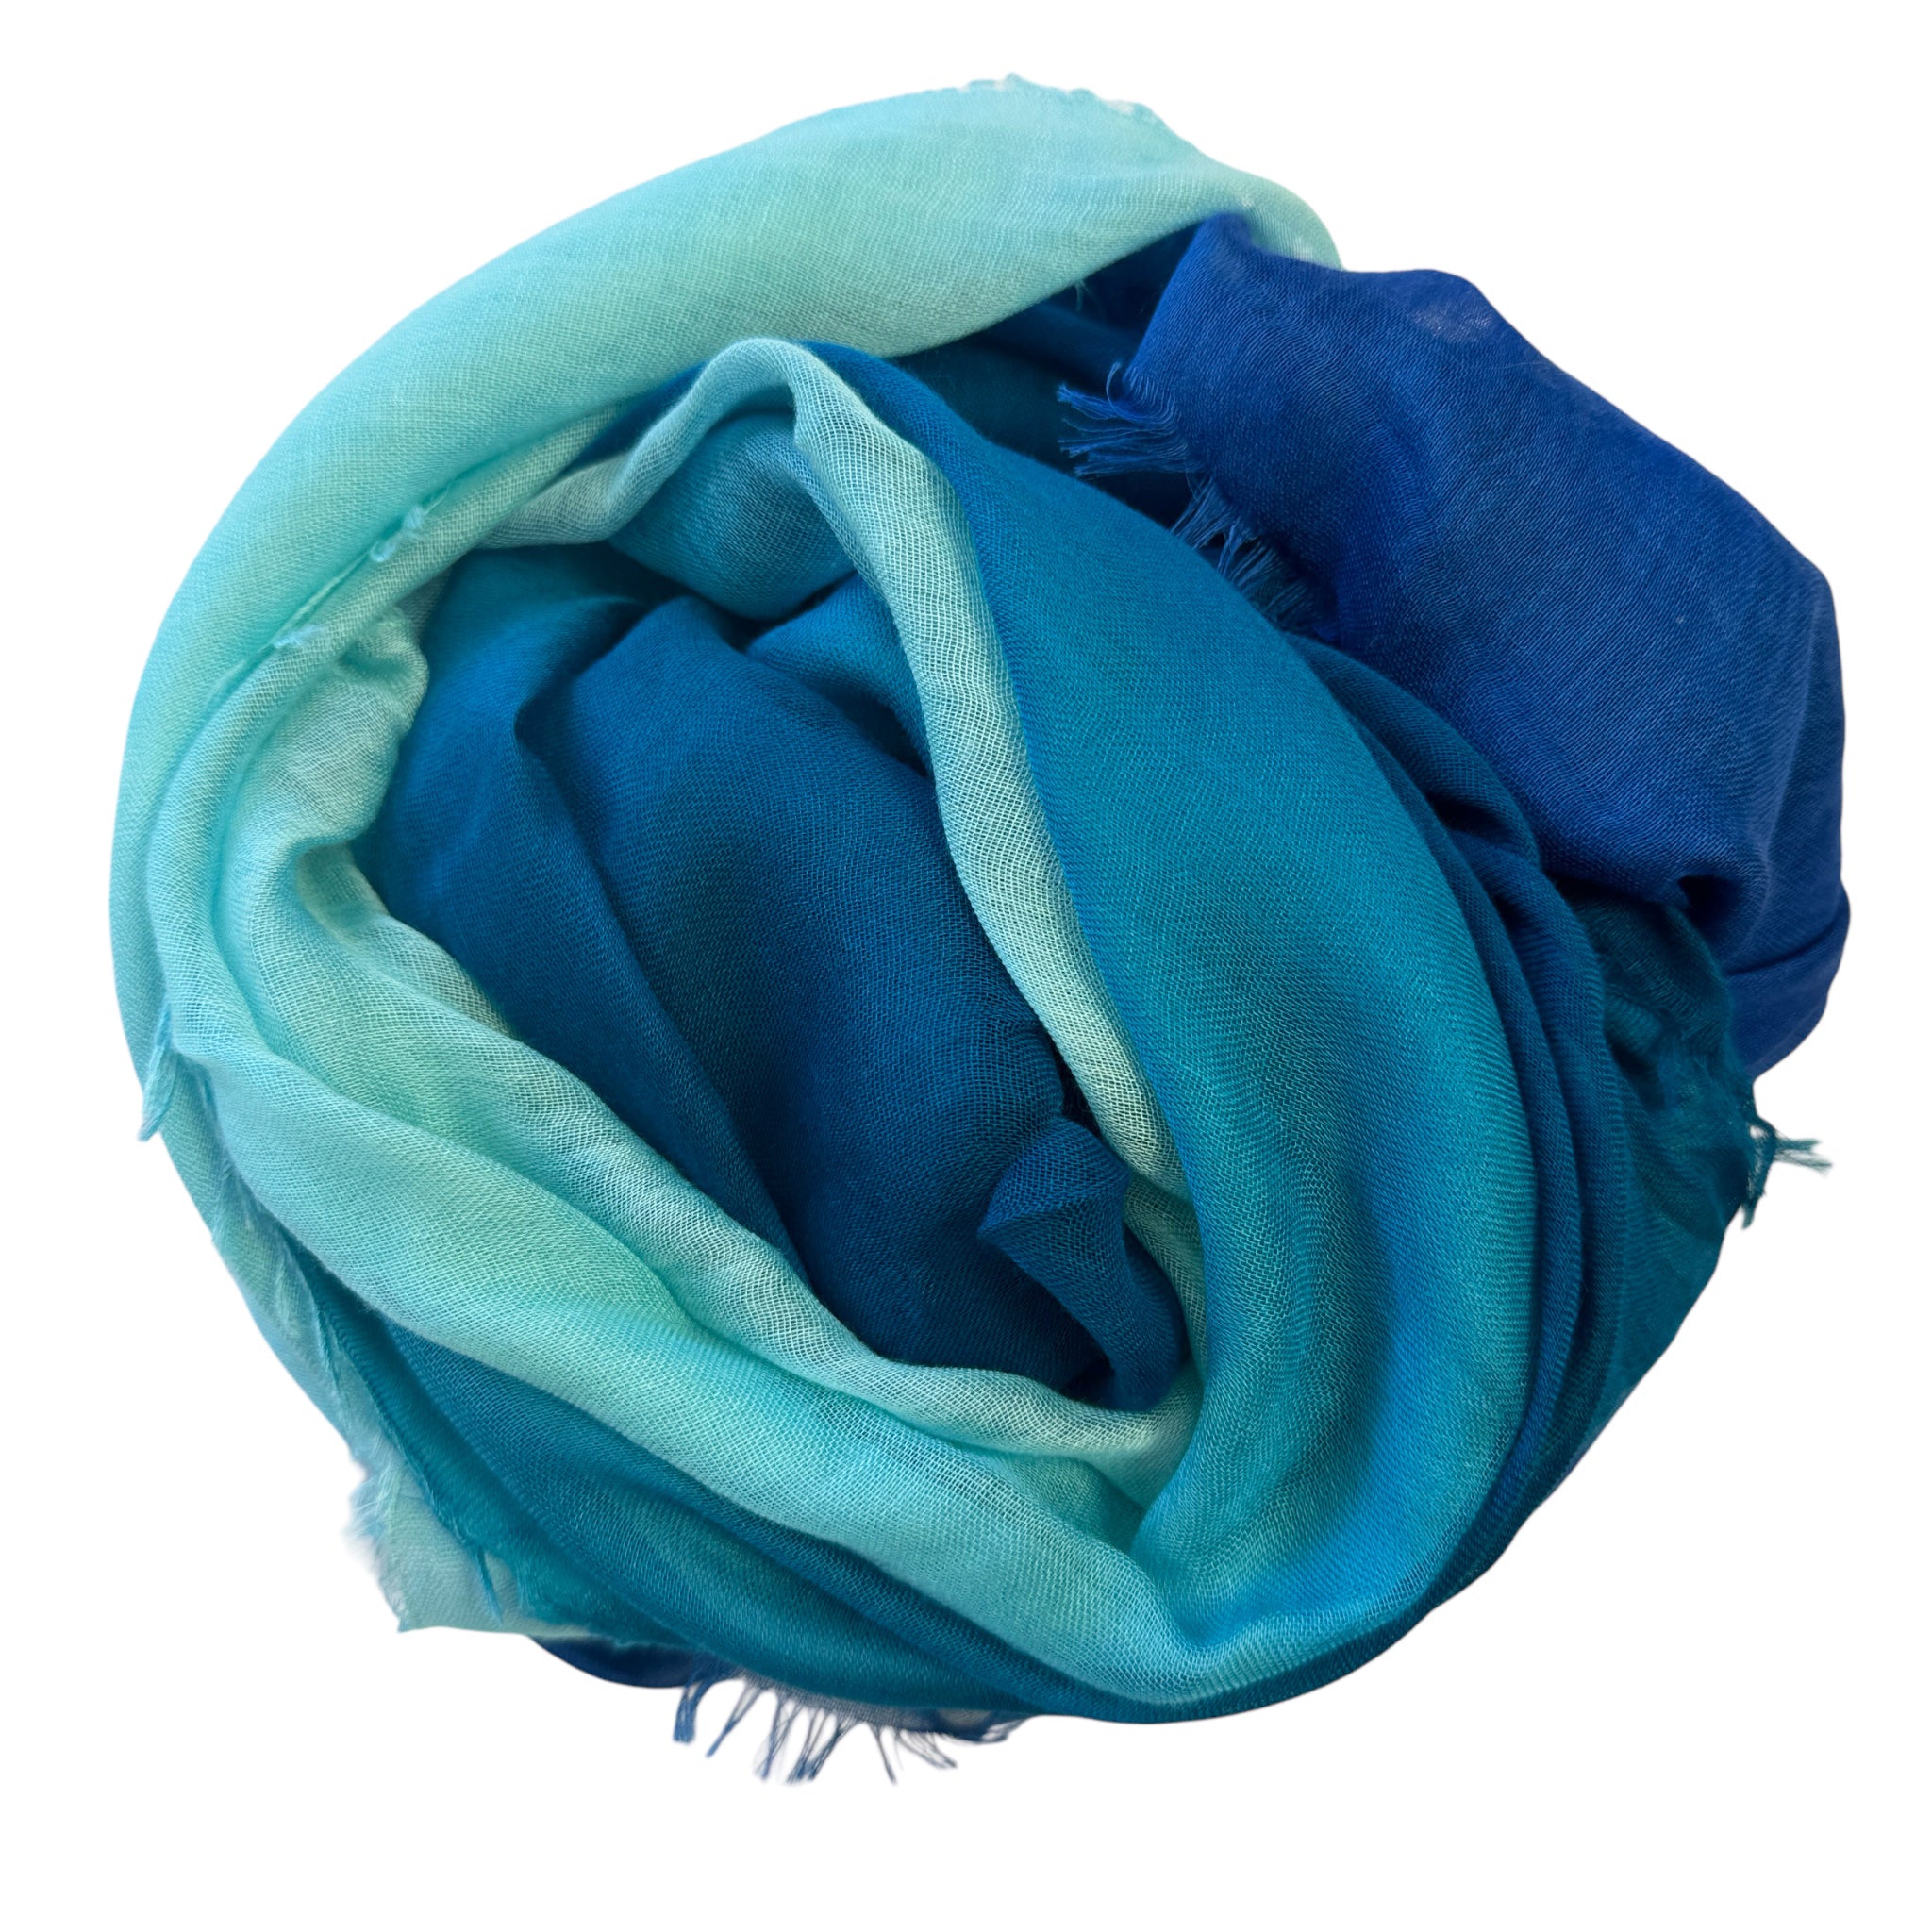 Blue Pacific Dream Cashmere and Silk Scarf in Aqua Teal and Cobalt Blue 47 x 37